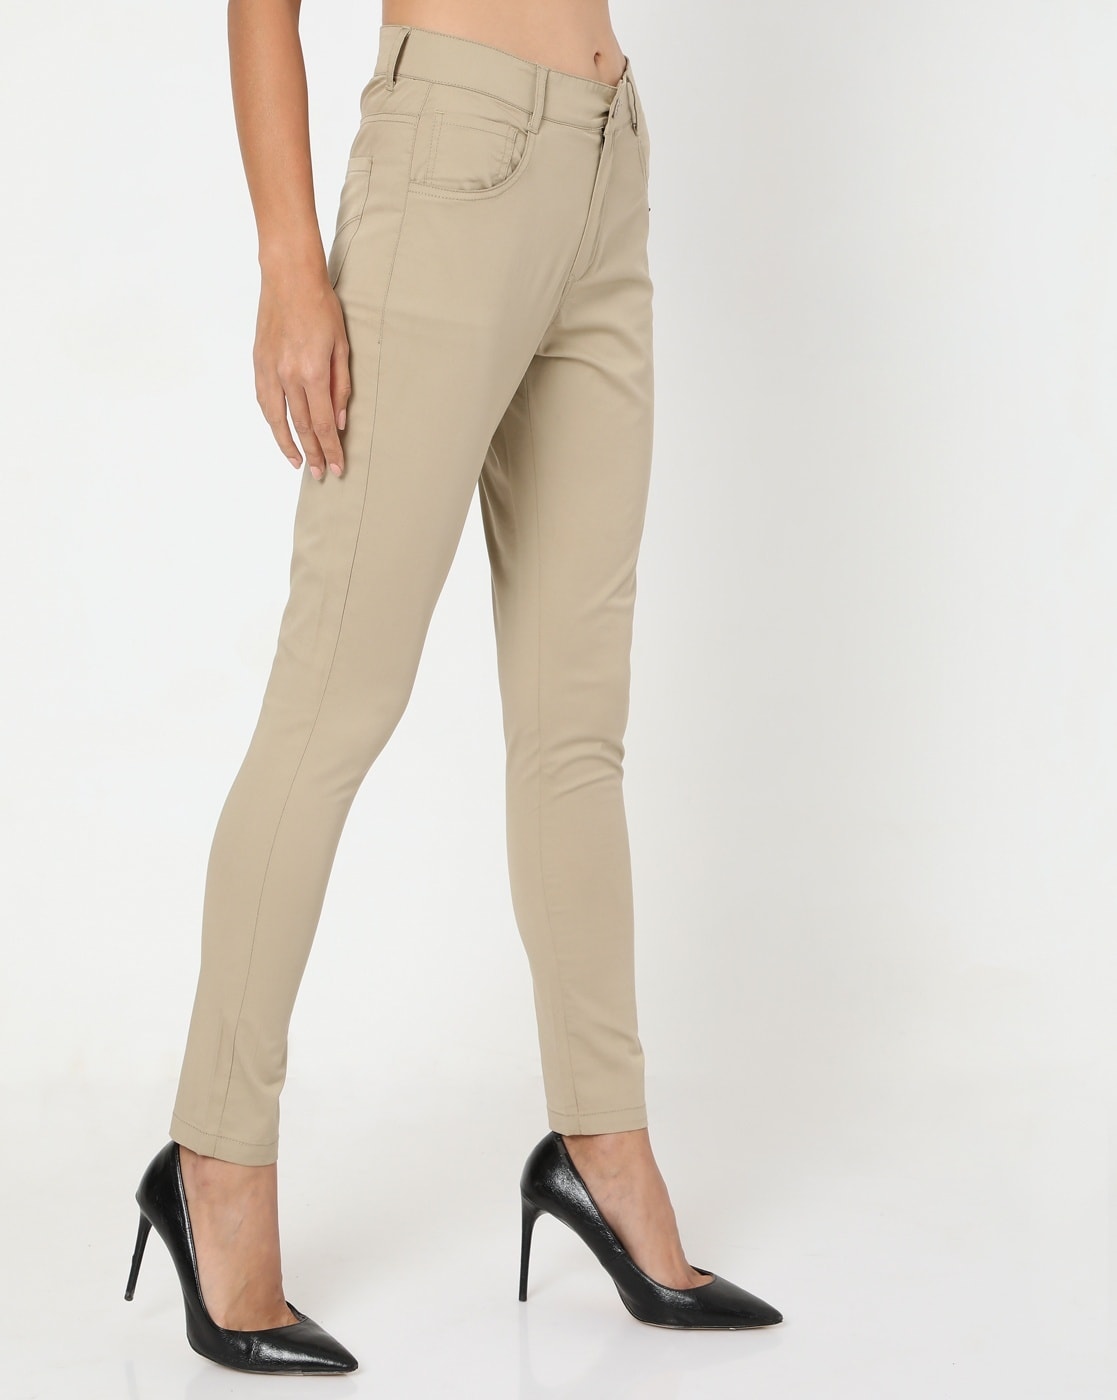 The Best Travel Pants for Women of 2023 Tested and Reviewed